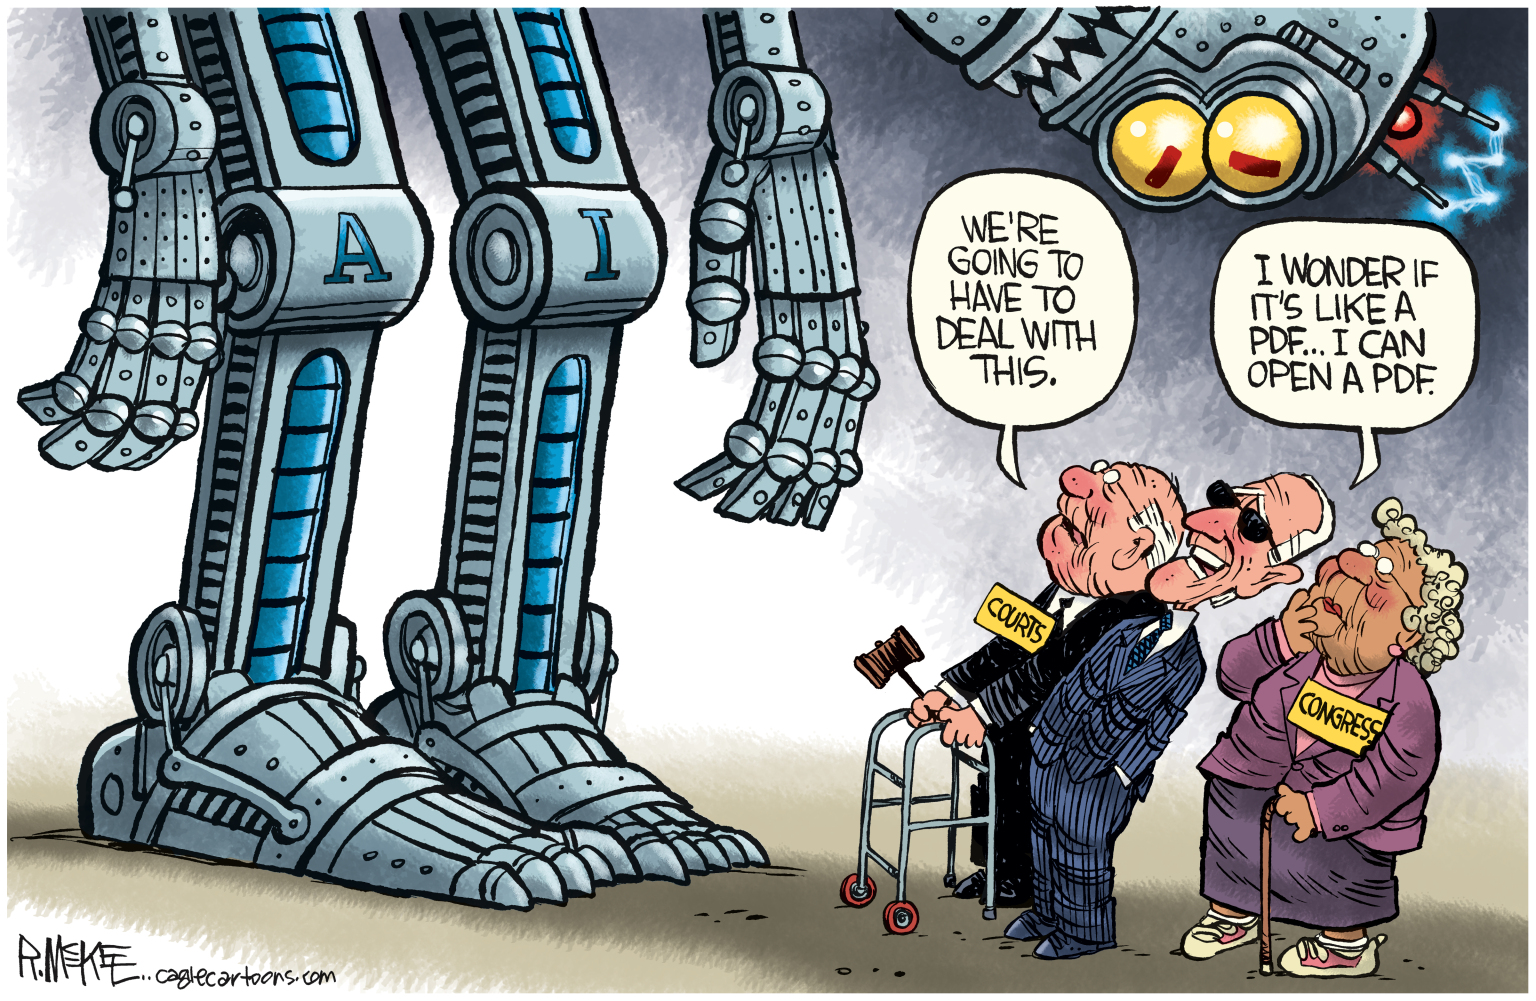 Elderly Politicians Take On AI - By Rick McKee